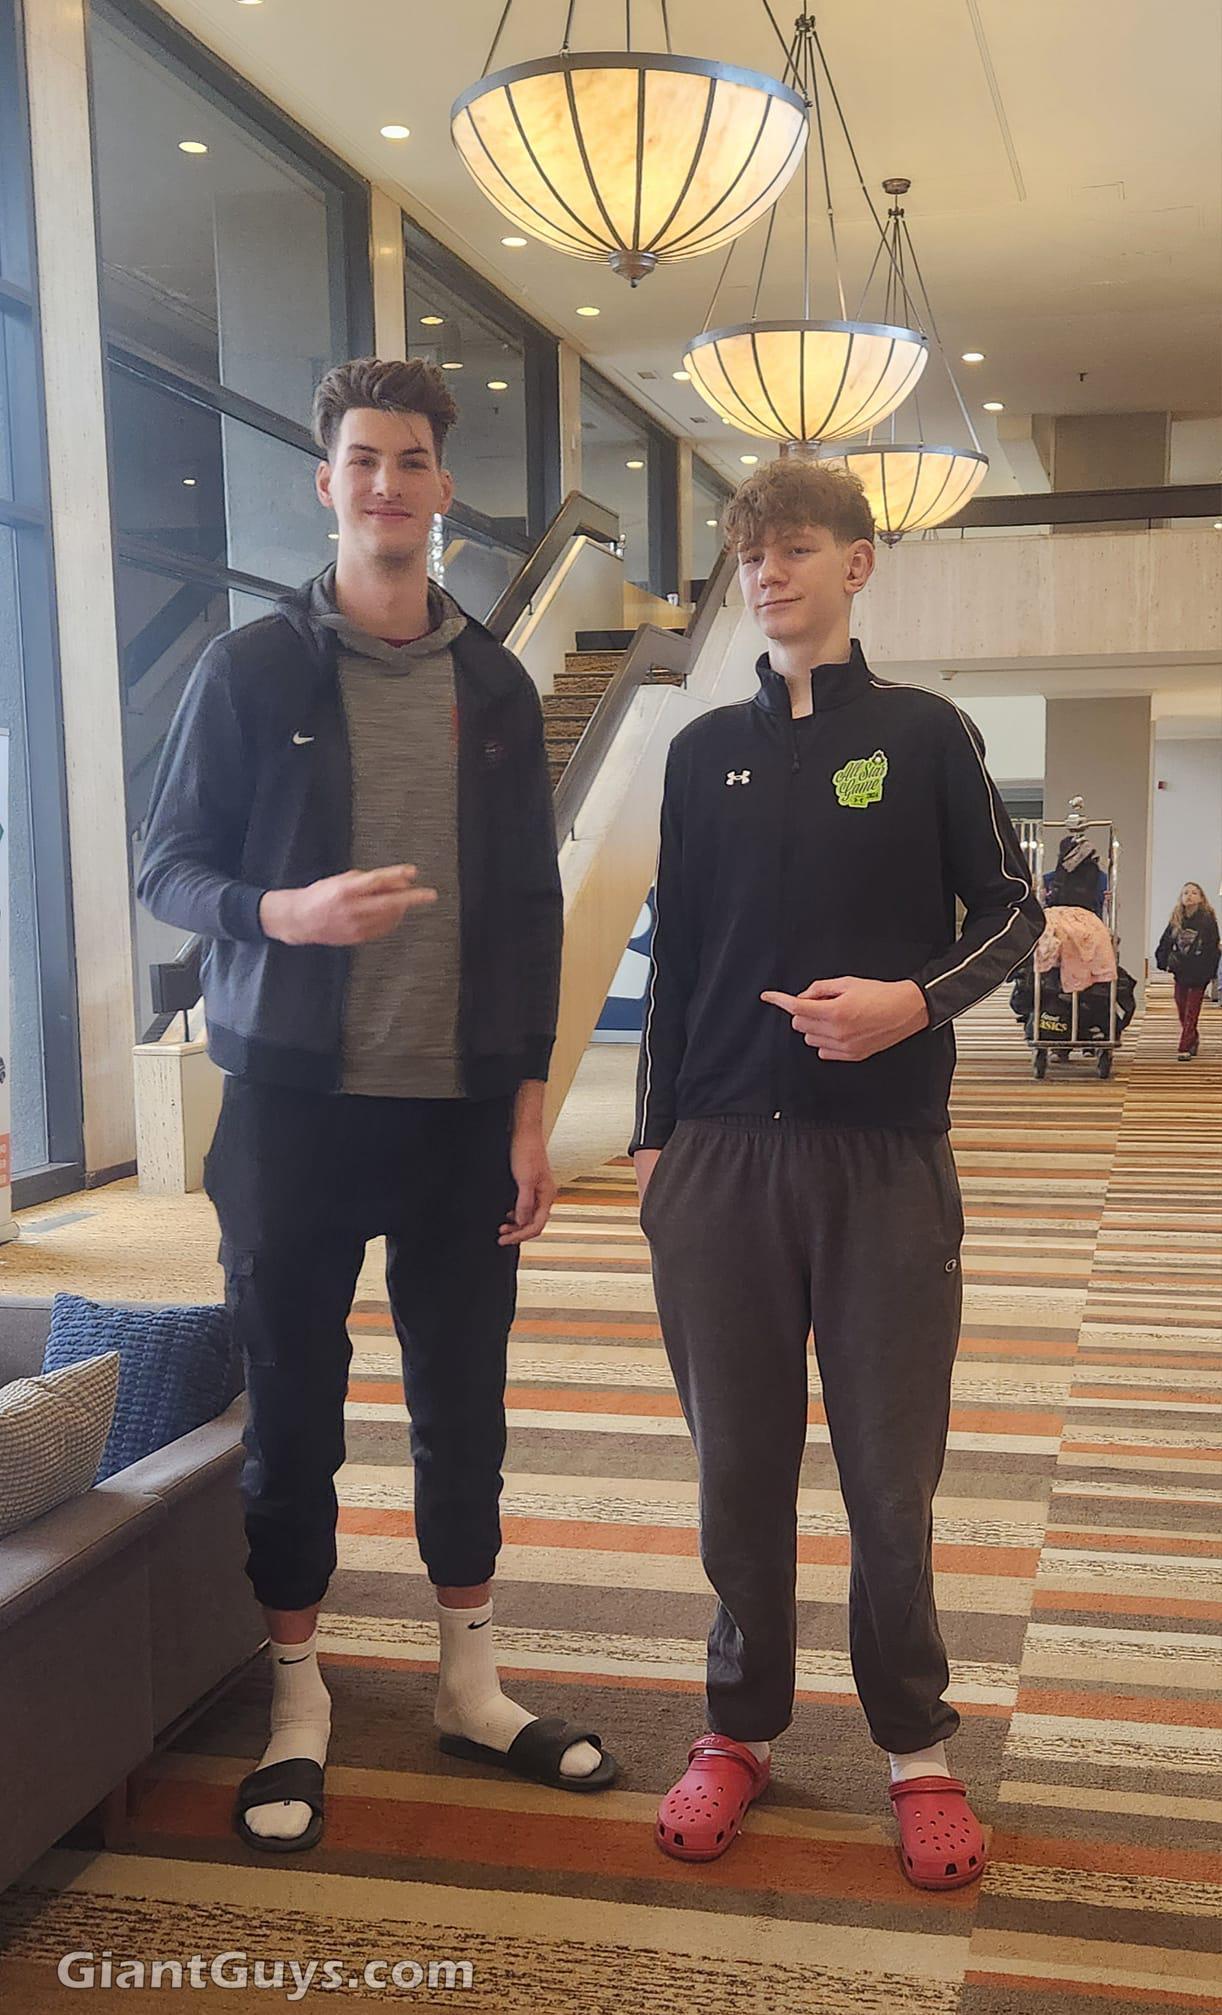 Olivier Rioux and 7ft2 guy